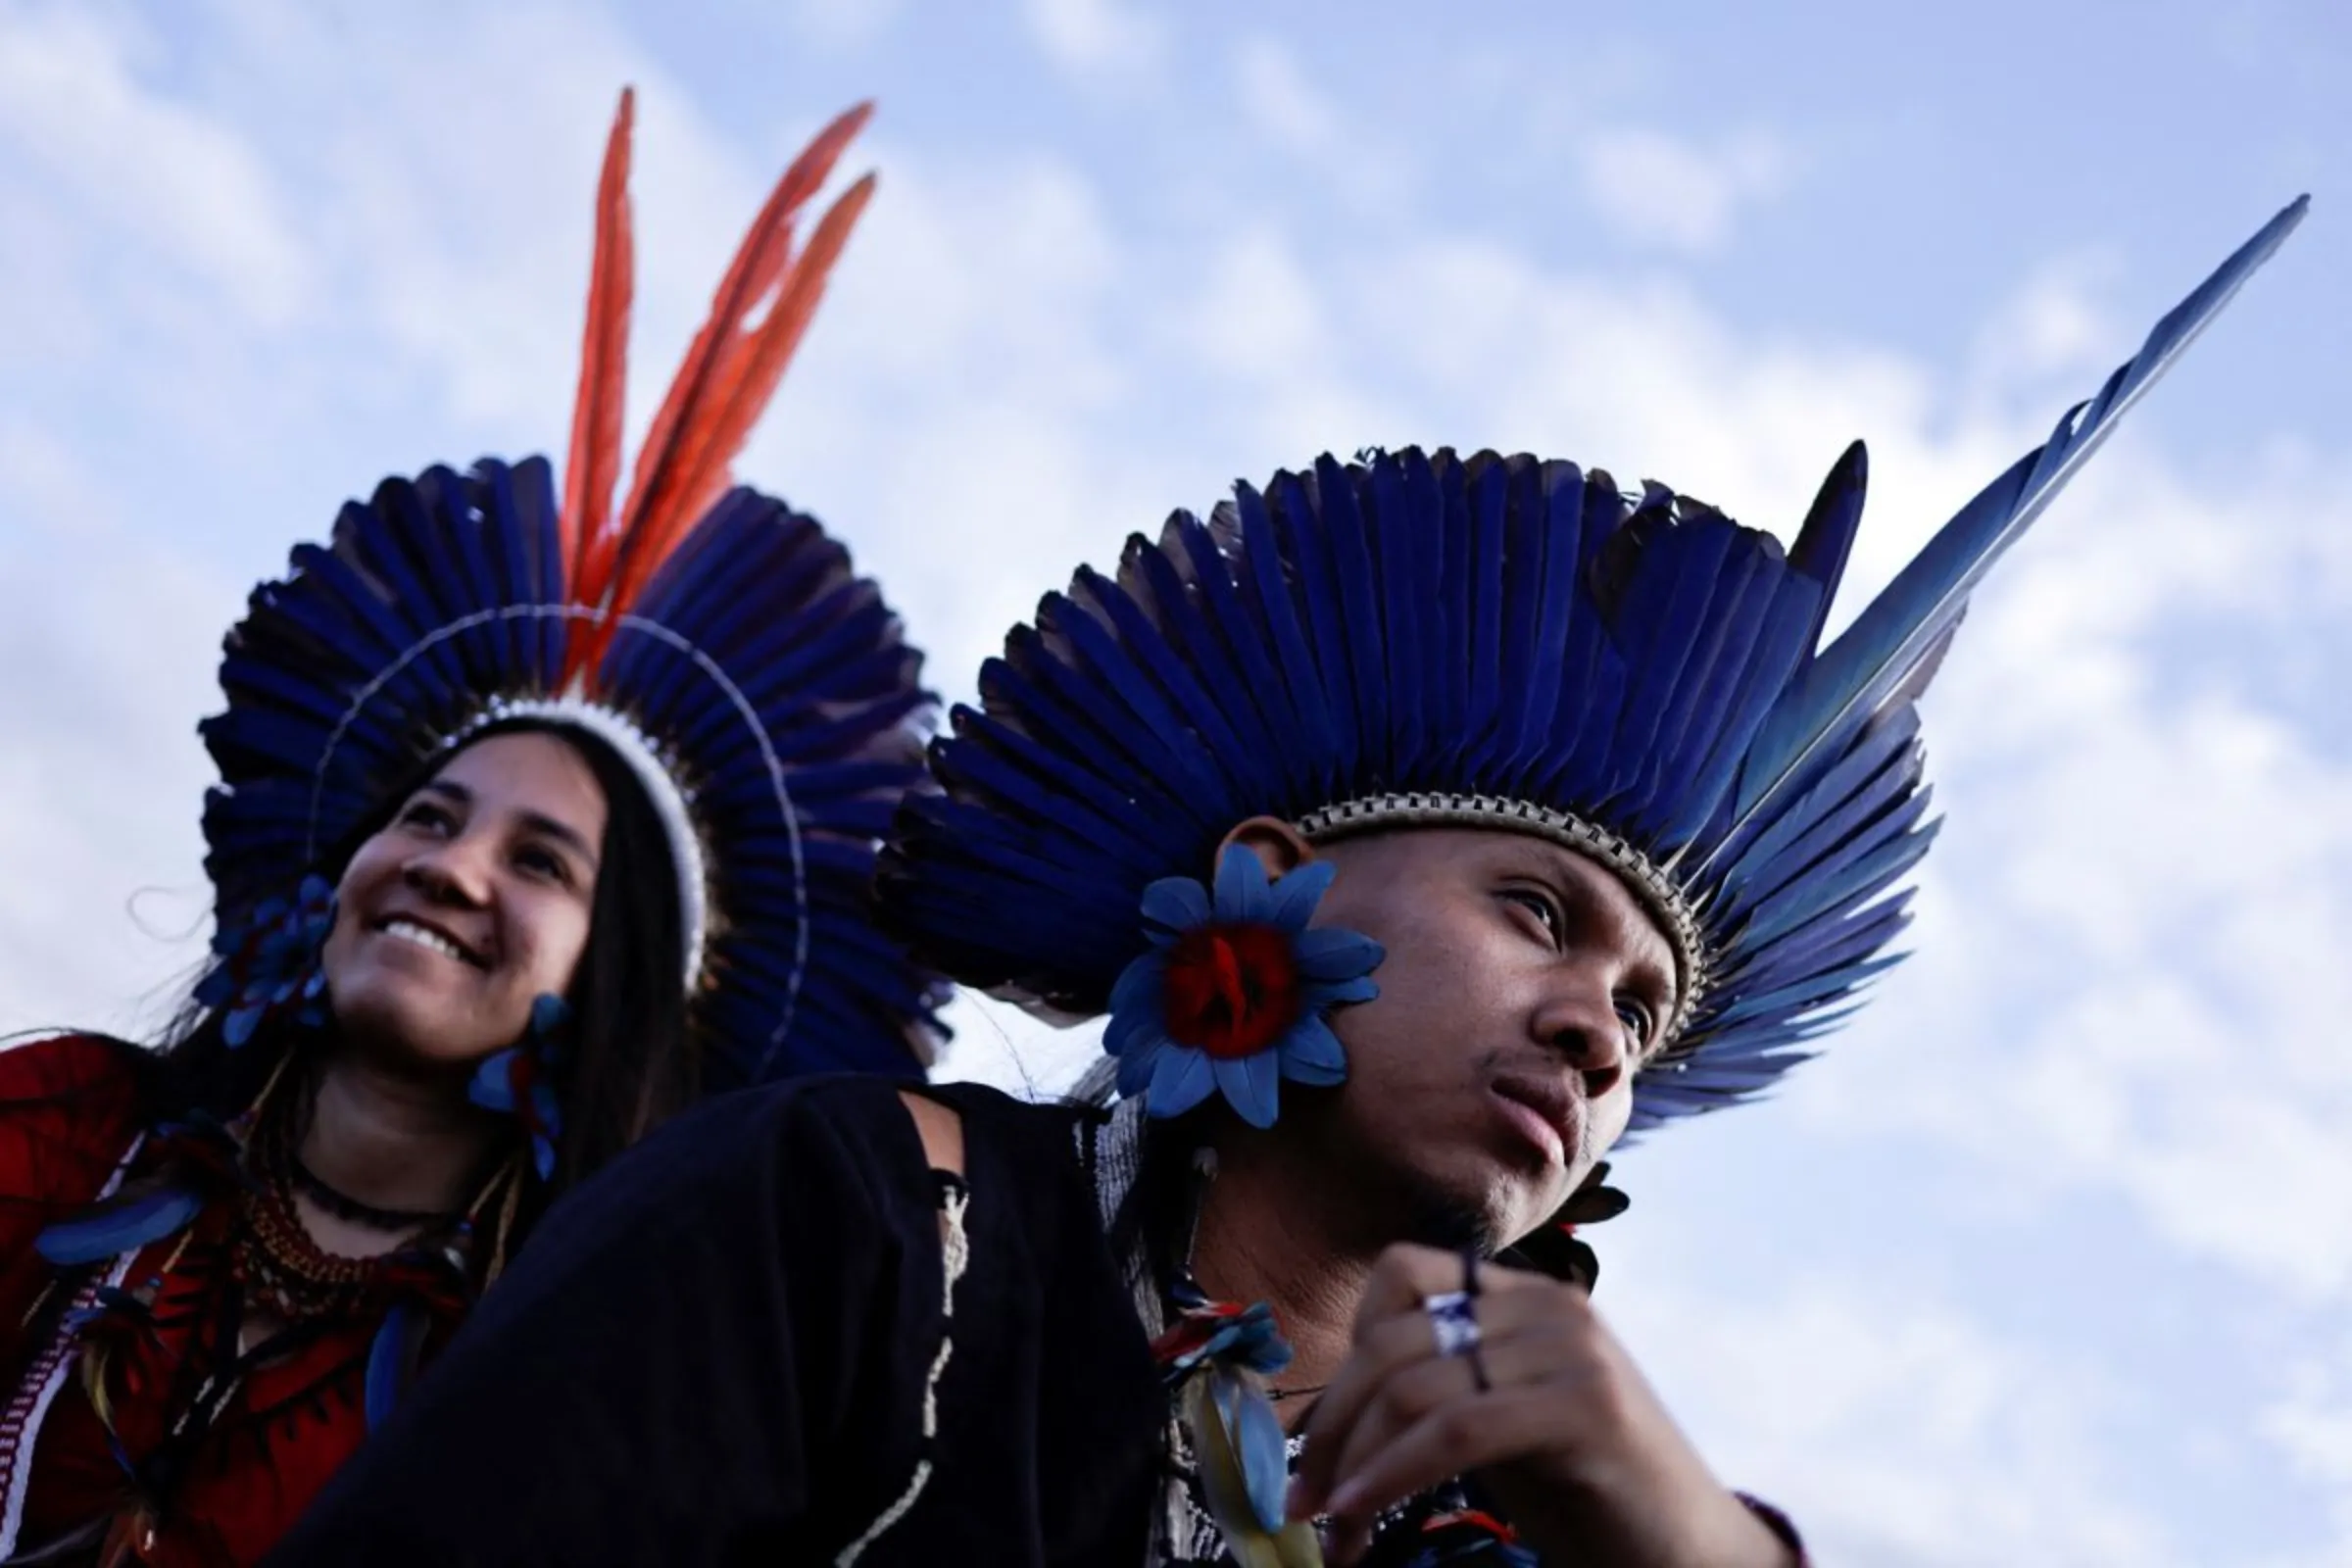 Indigenous people of different ethnic groups take part at the Terra Livre (Free Land) camp, a protest-camp to defend demarcation indigenous land and cultural rights, in Brasilia, Brazil April 24, 2023